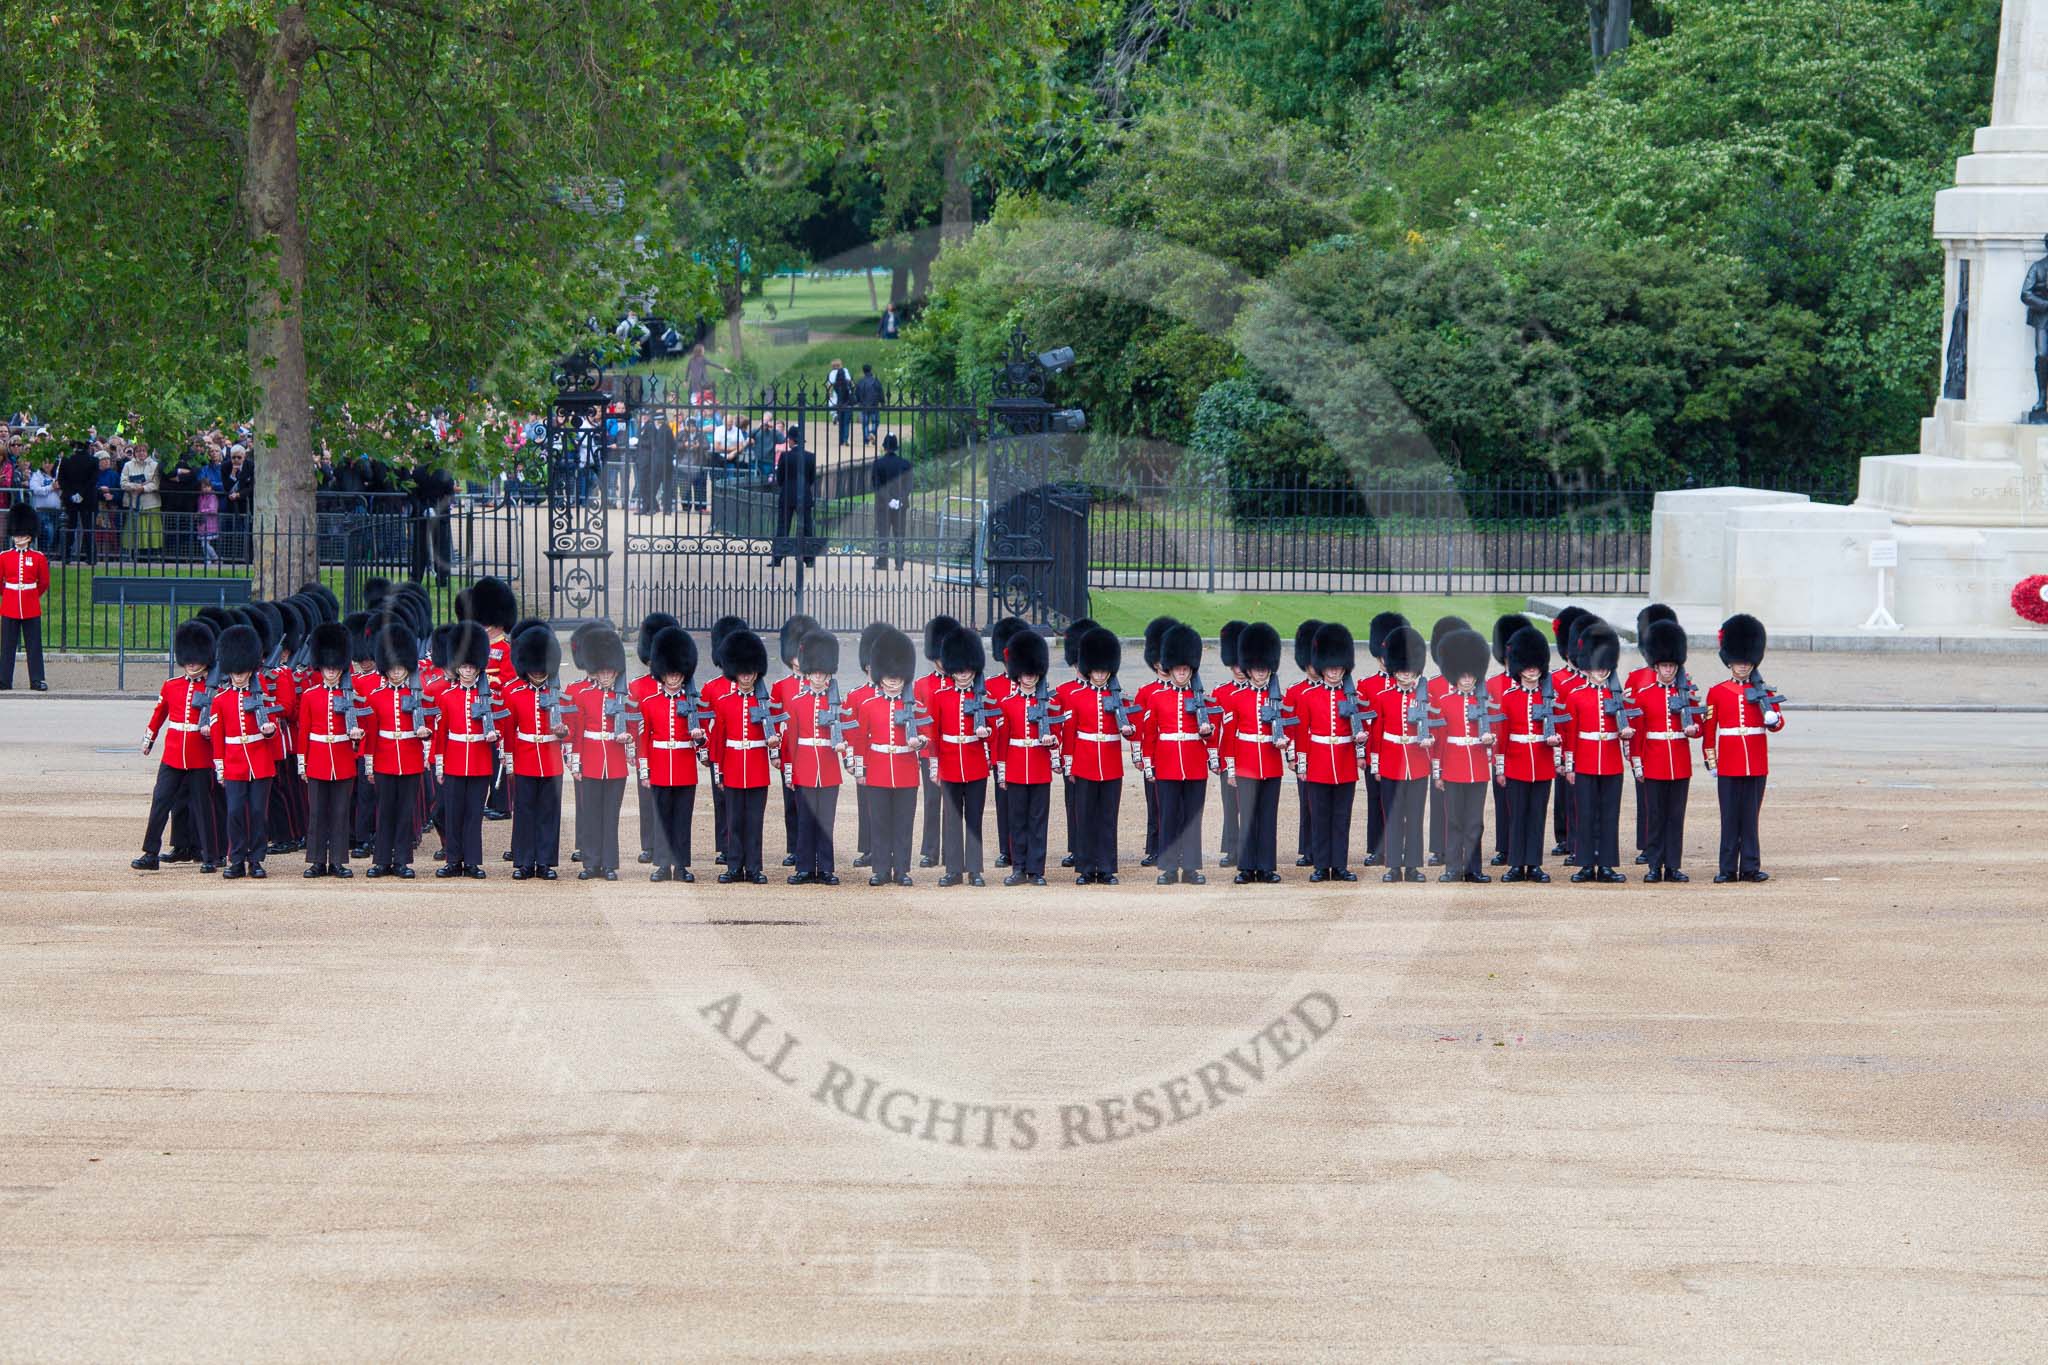 Trooping the Colour 2012: The Guards Divisions are changing their positions to form a long, L-shaped double row of guardsmen..
Horse Guards Parade, Westminster,
London SW1,

United Kingdom,
on 16 June 2012 at 10:35, image #88